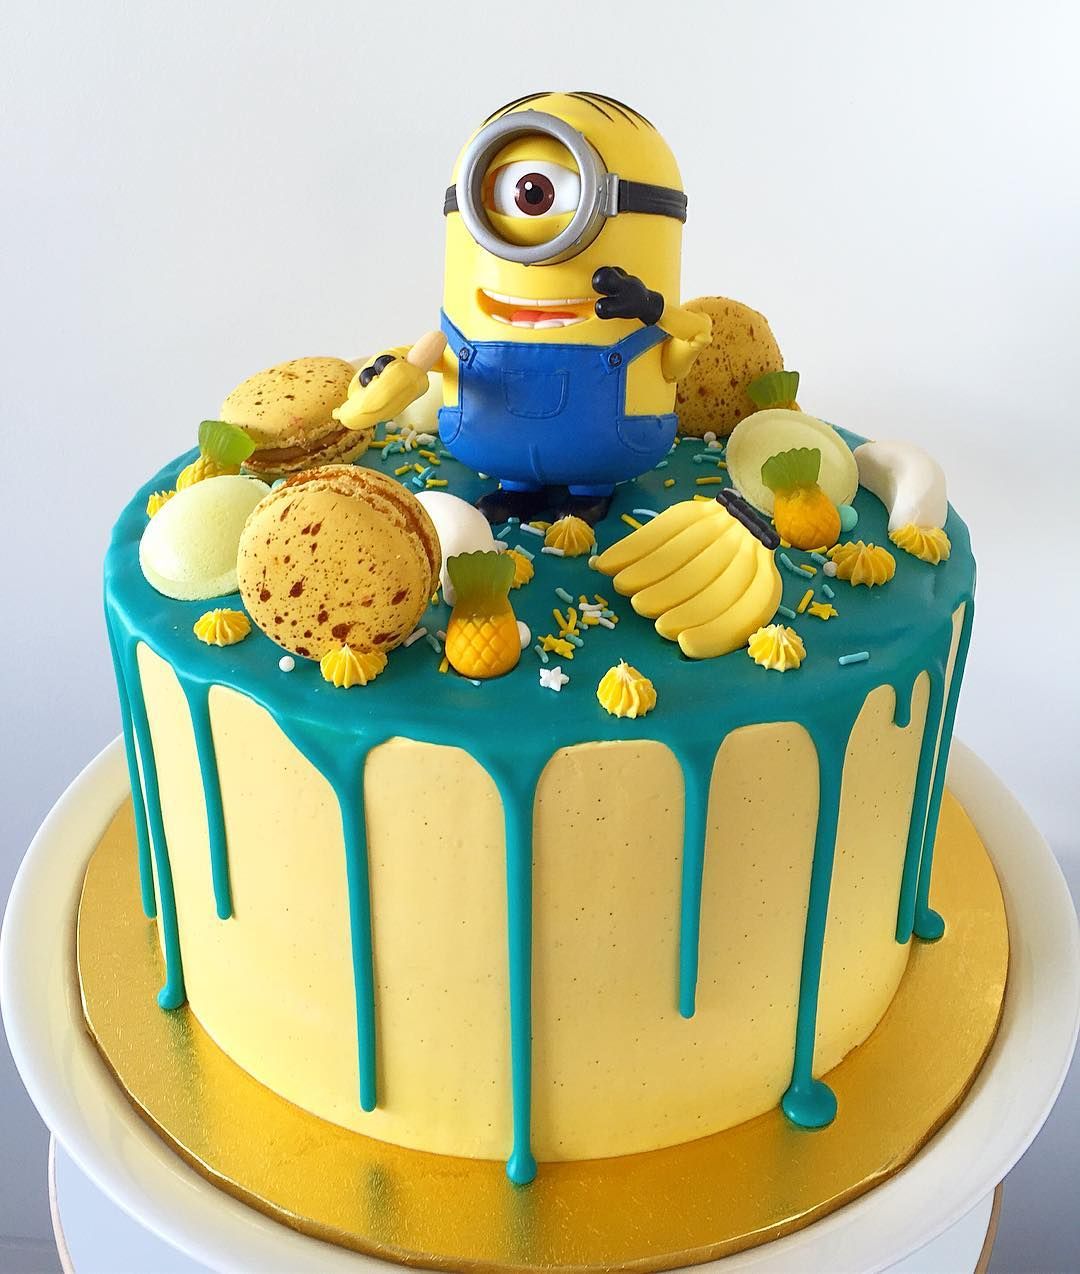 2 KG Minion customized Cake, Super Cake- Online Cake delivery in ...